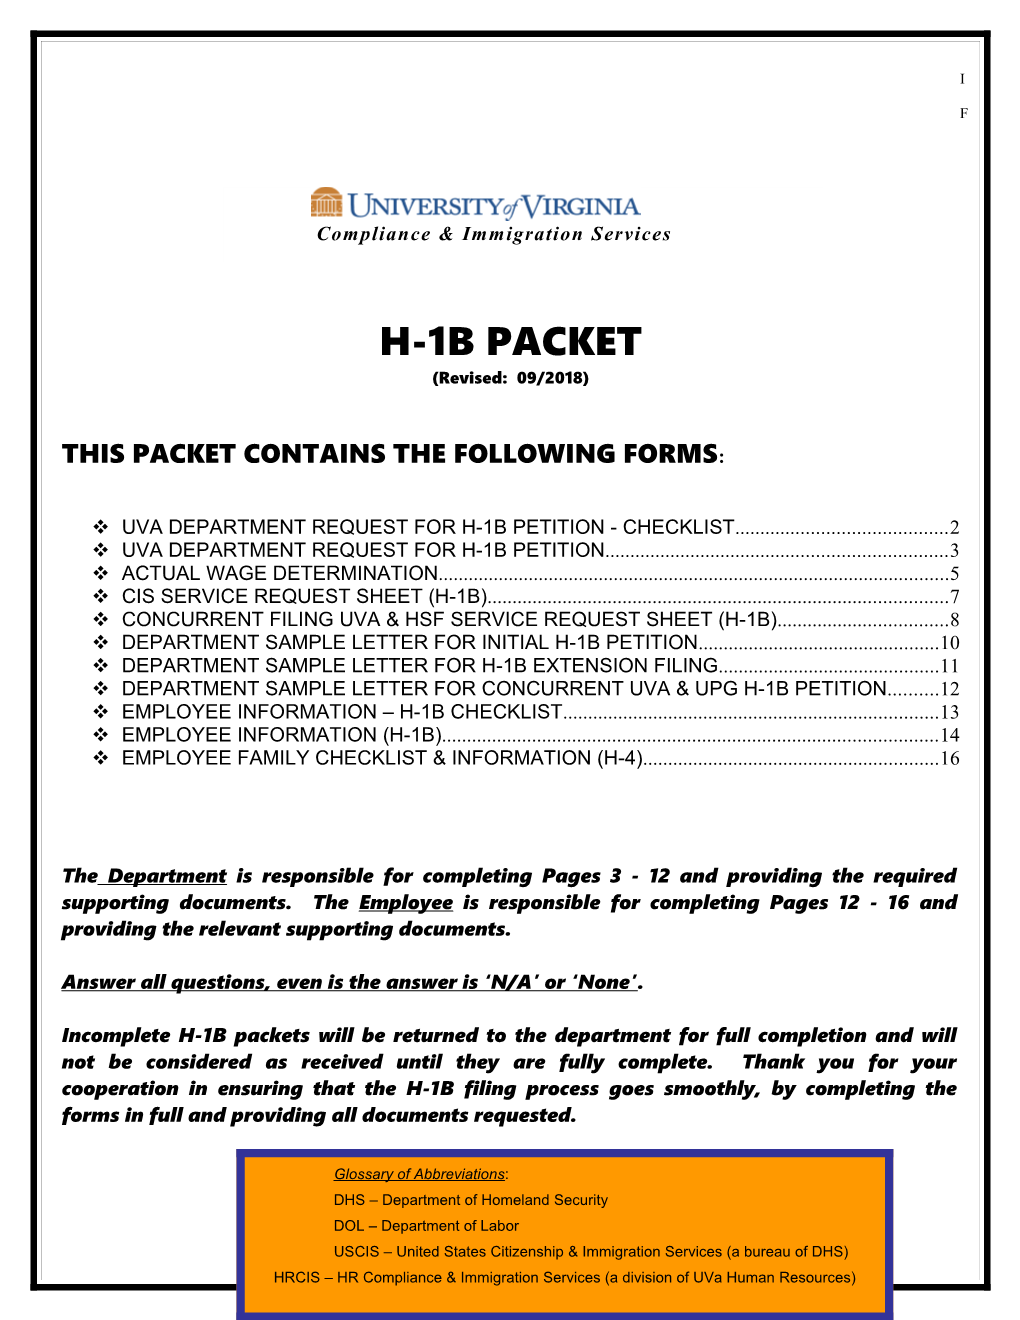 This Packet Contains the Following Forms